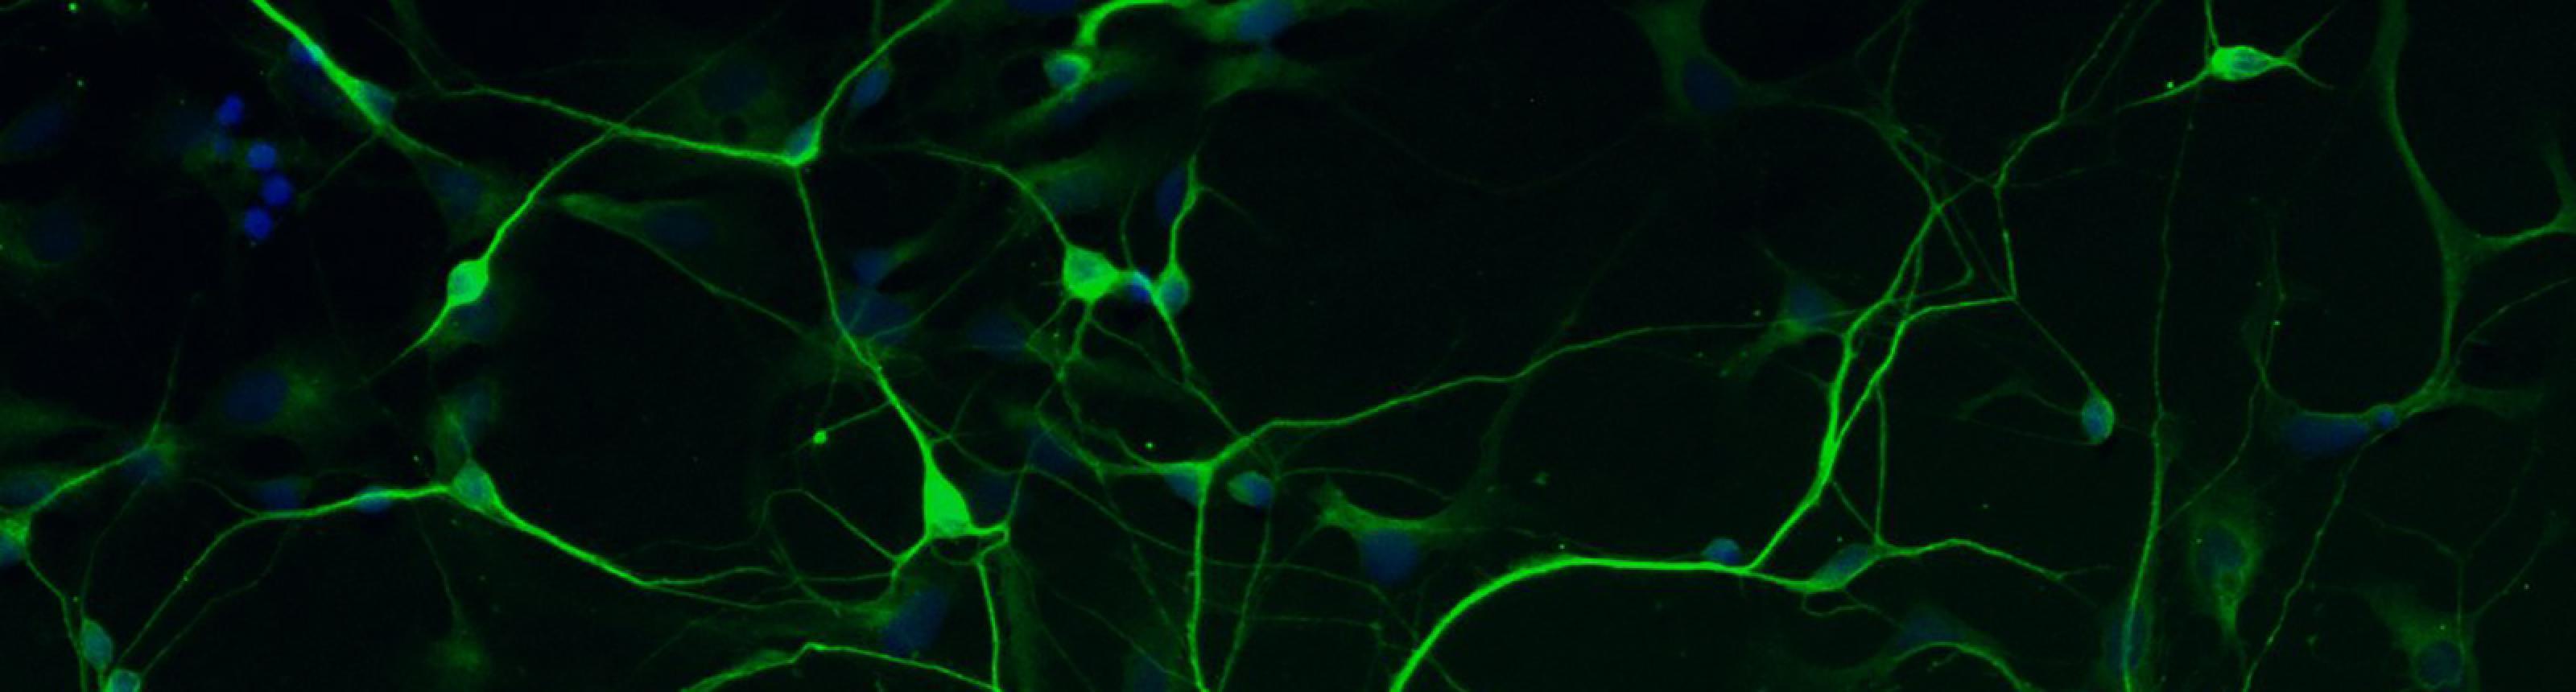 Image of human stem cell derived neuron